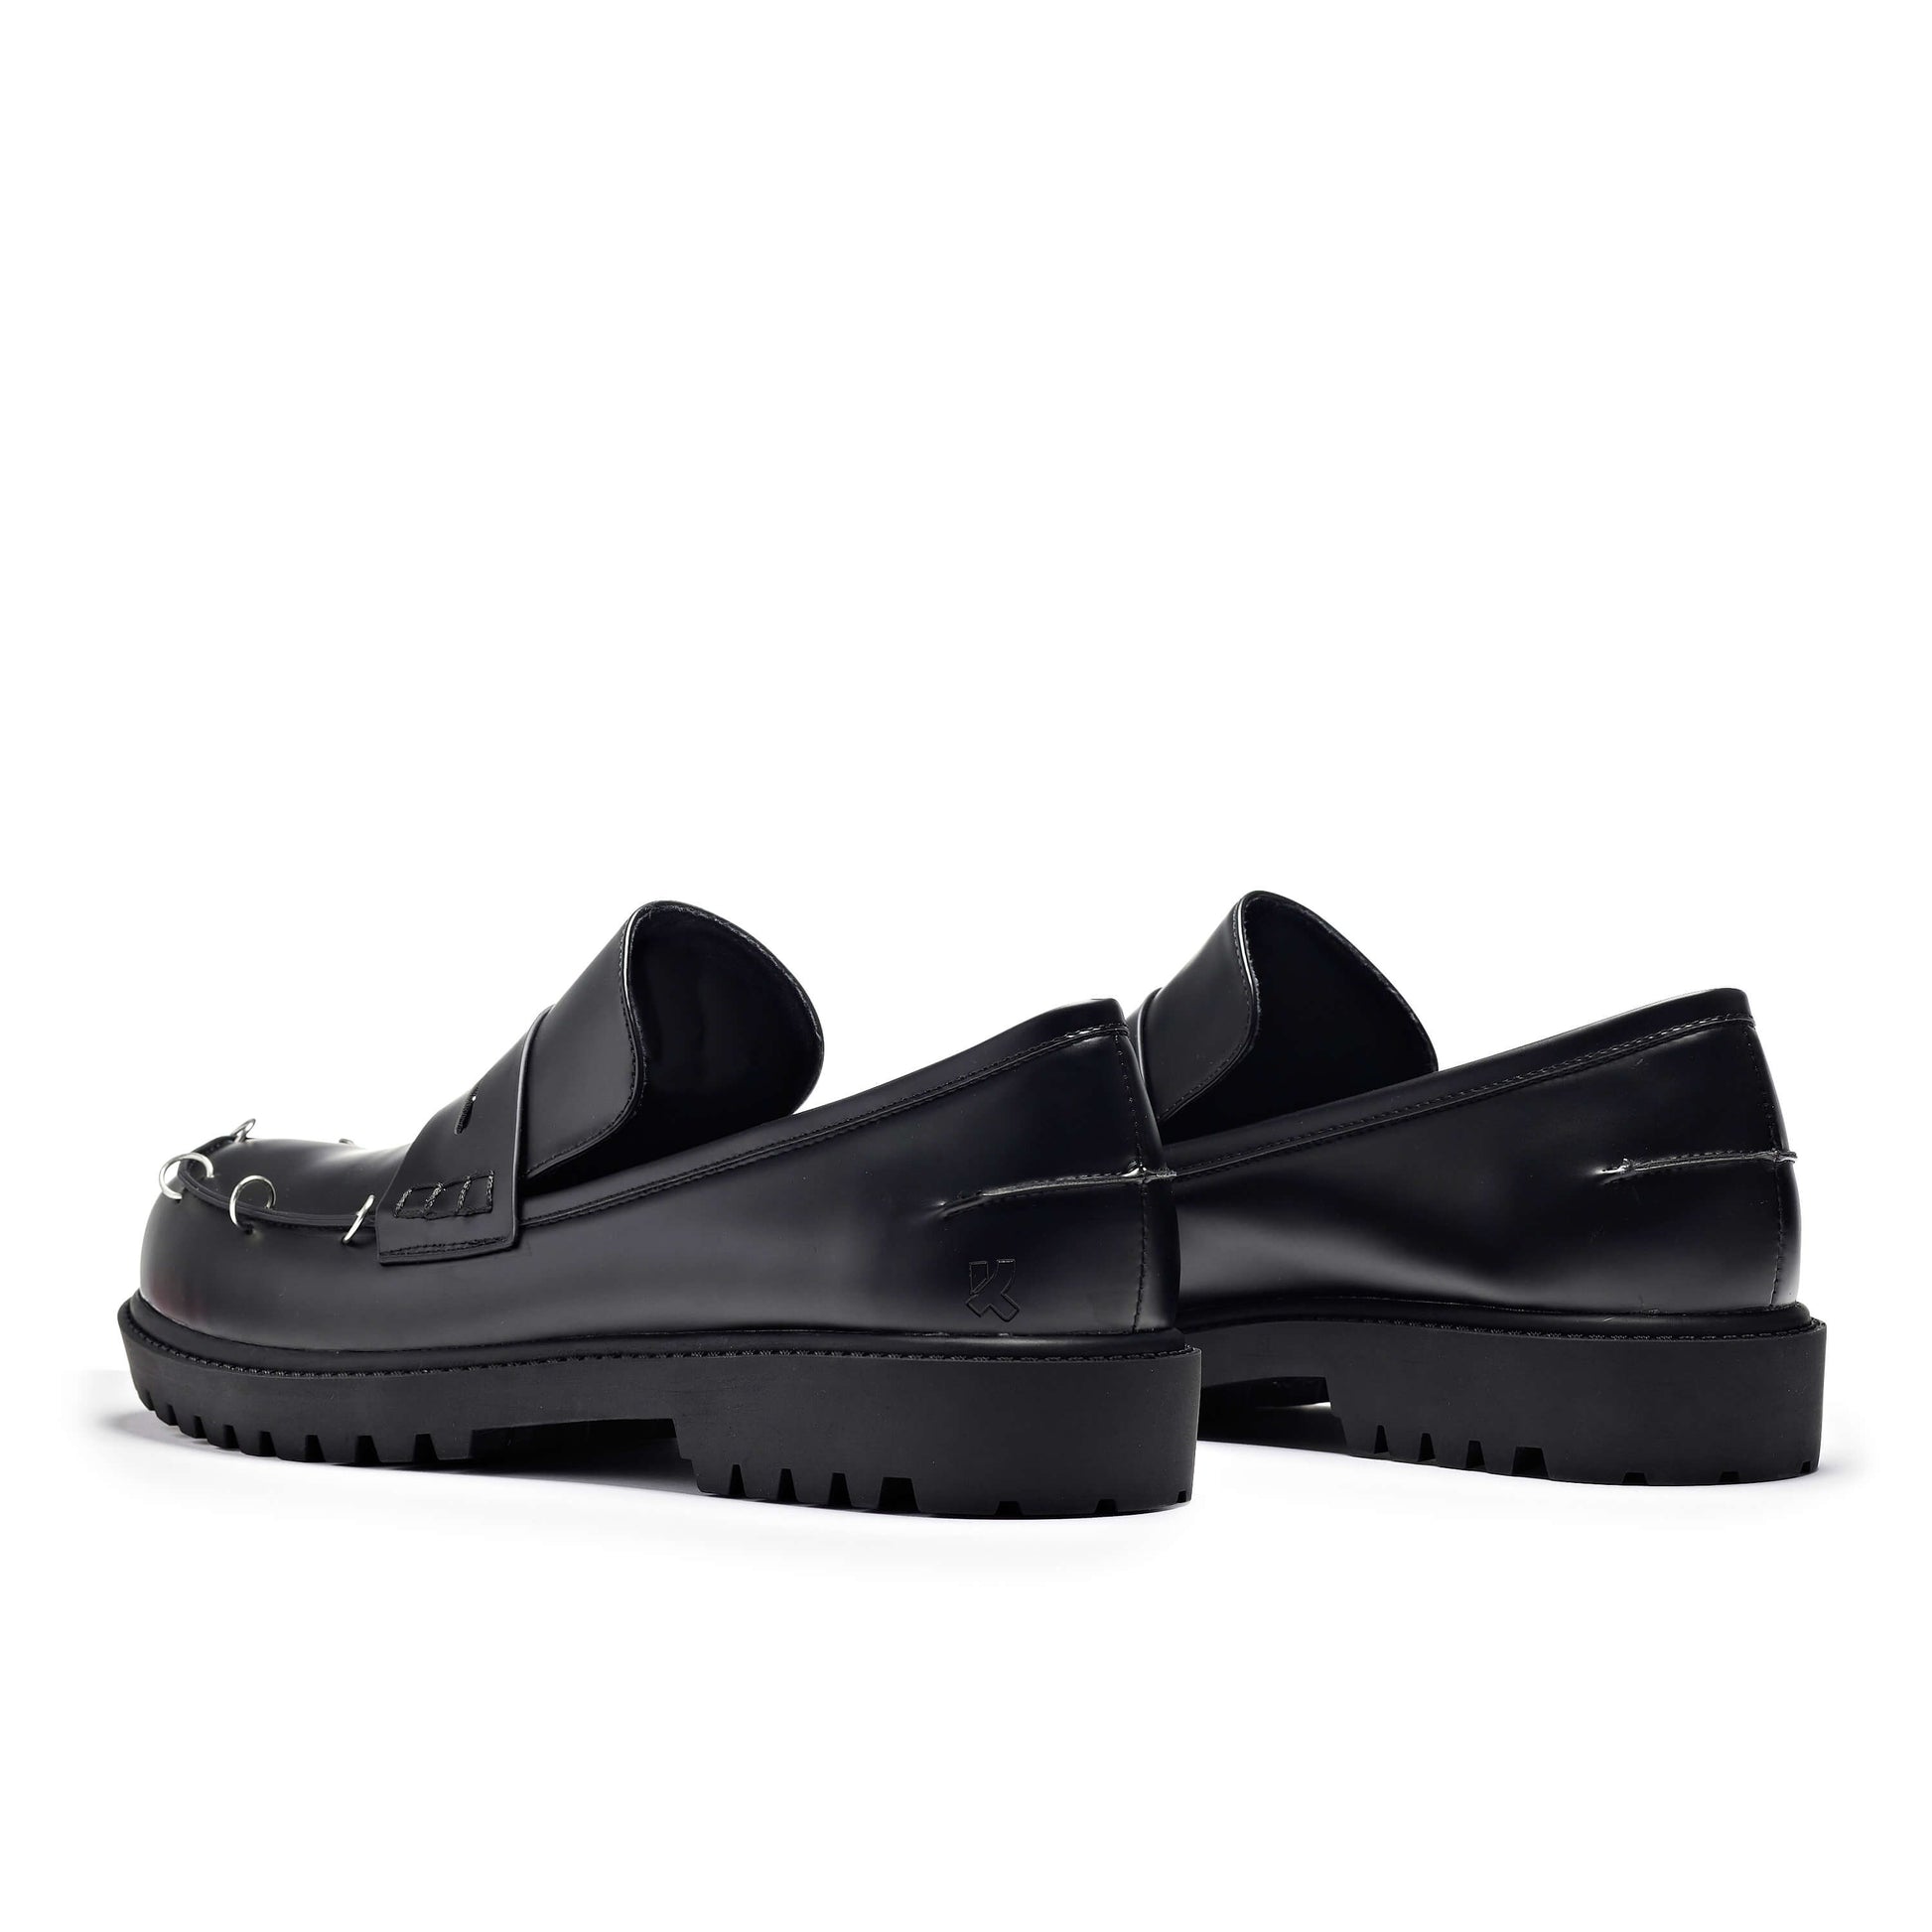 The Kaiden Pierced Men's Loafers - Shoes - KOI Footwear - Black - Back View